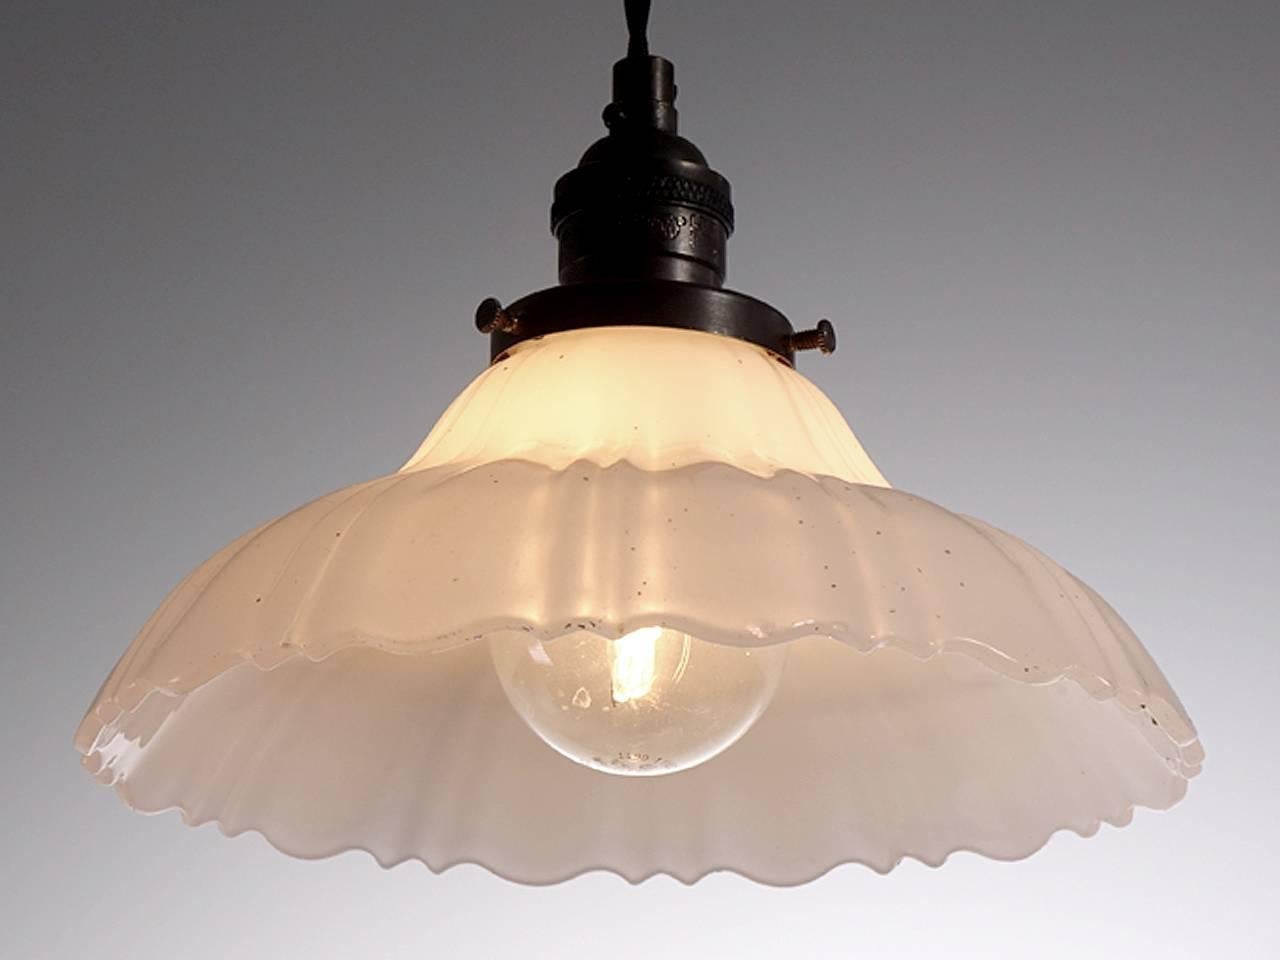 Softly curved bell shaped pendants are a classic. They feel at home with any style decor. This example is an extra heavy thick-thin pattern in cast Clam Broth glass with a scalloped edge. The pattern has two thin ribs and one wide. The lamps are